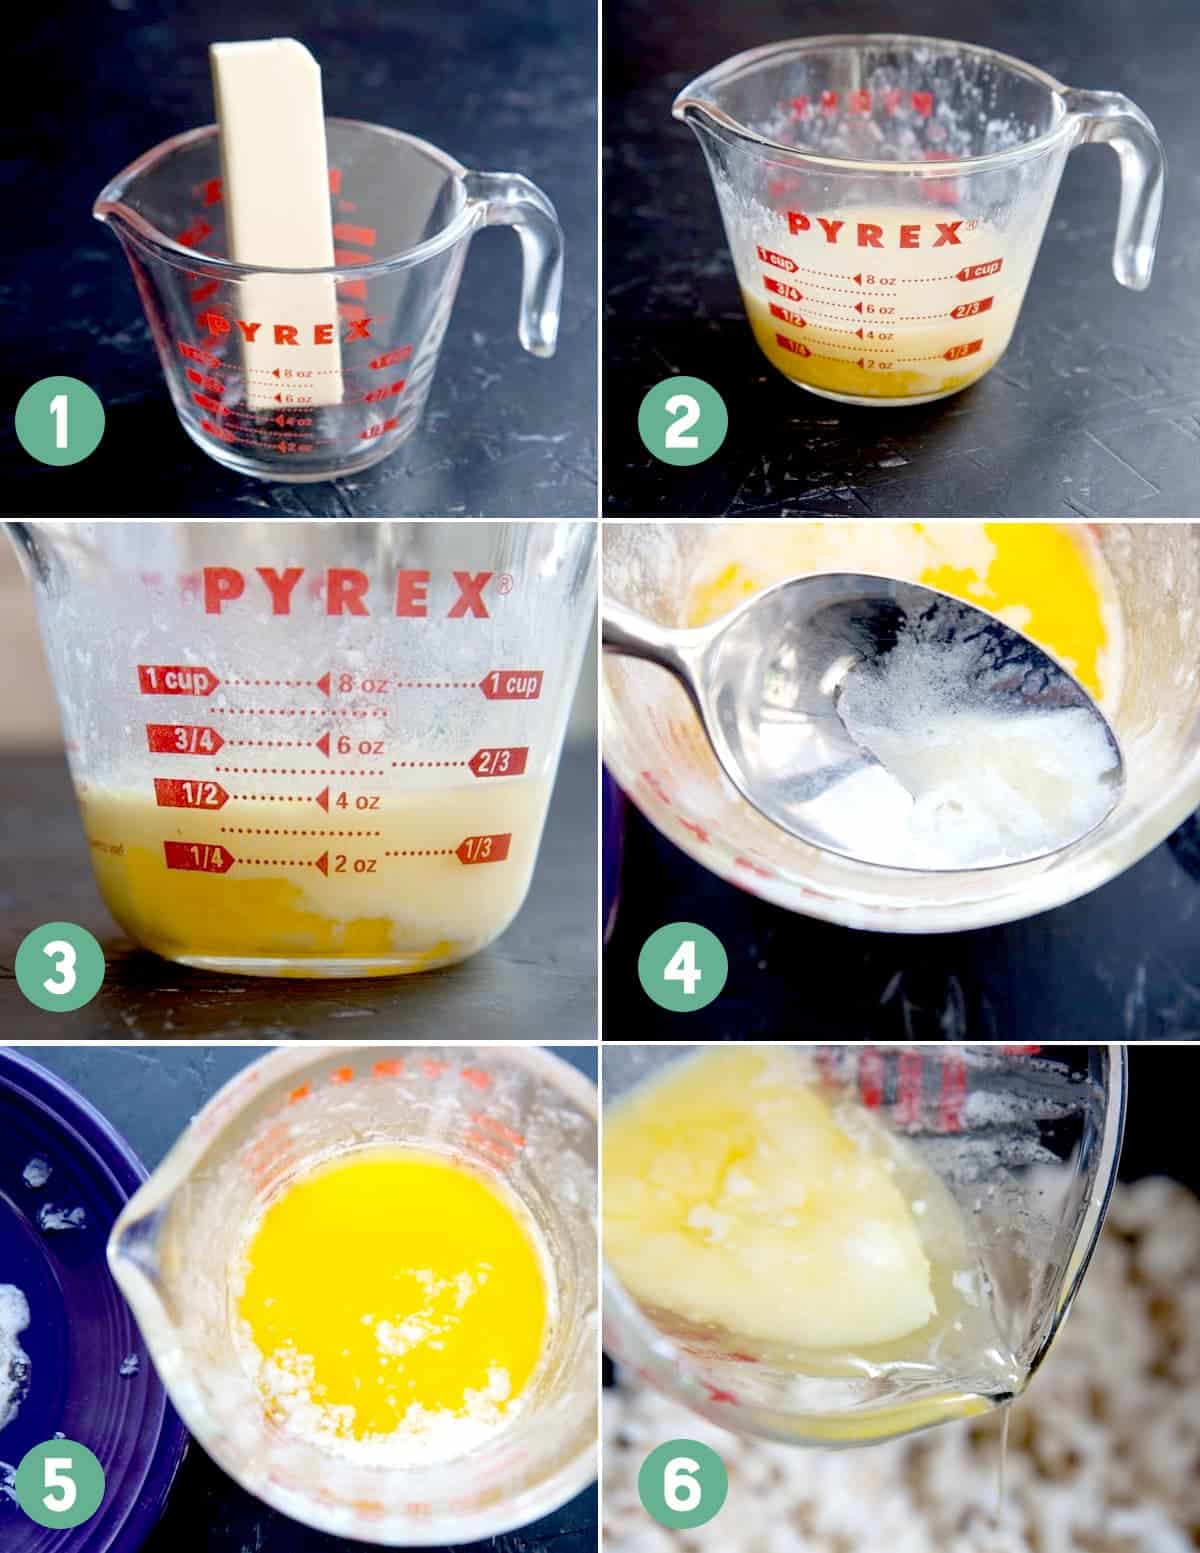 Numbered images show how to clarify butter for popcorn.